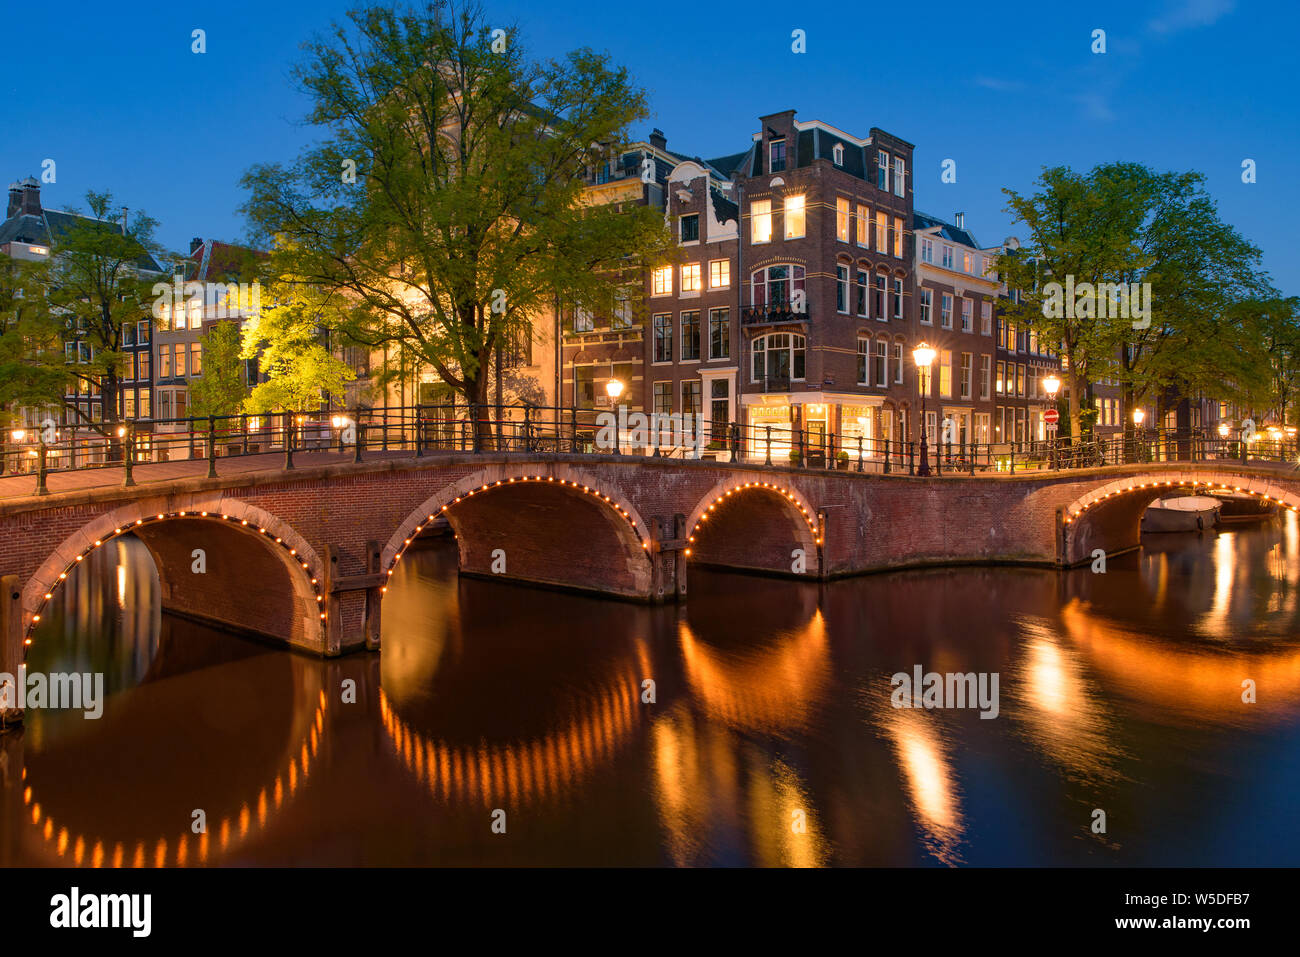 Reflection of bridge along the canal at night in Amsterdam, Netherlands Stock Photo